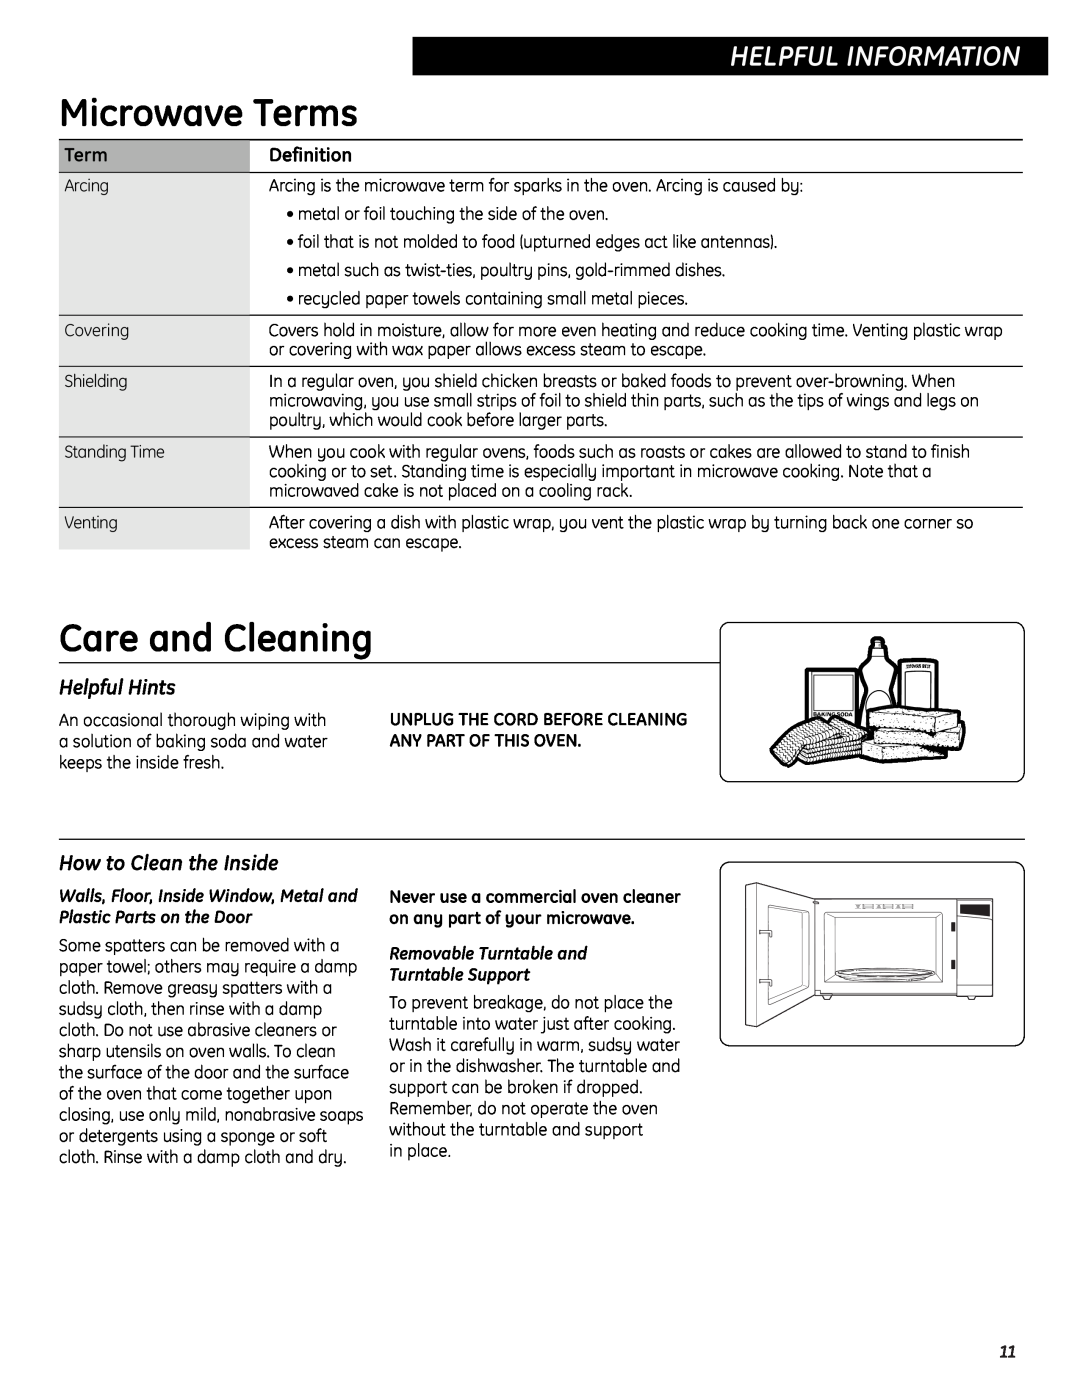 GE JES0734PMRR Microwave Terms, Care and Cleaning, Helpful Hints, How to Clean the Inside, Definition 